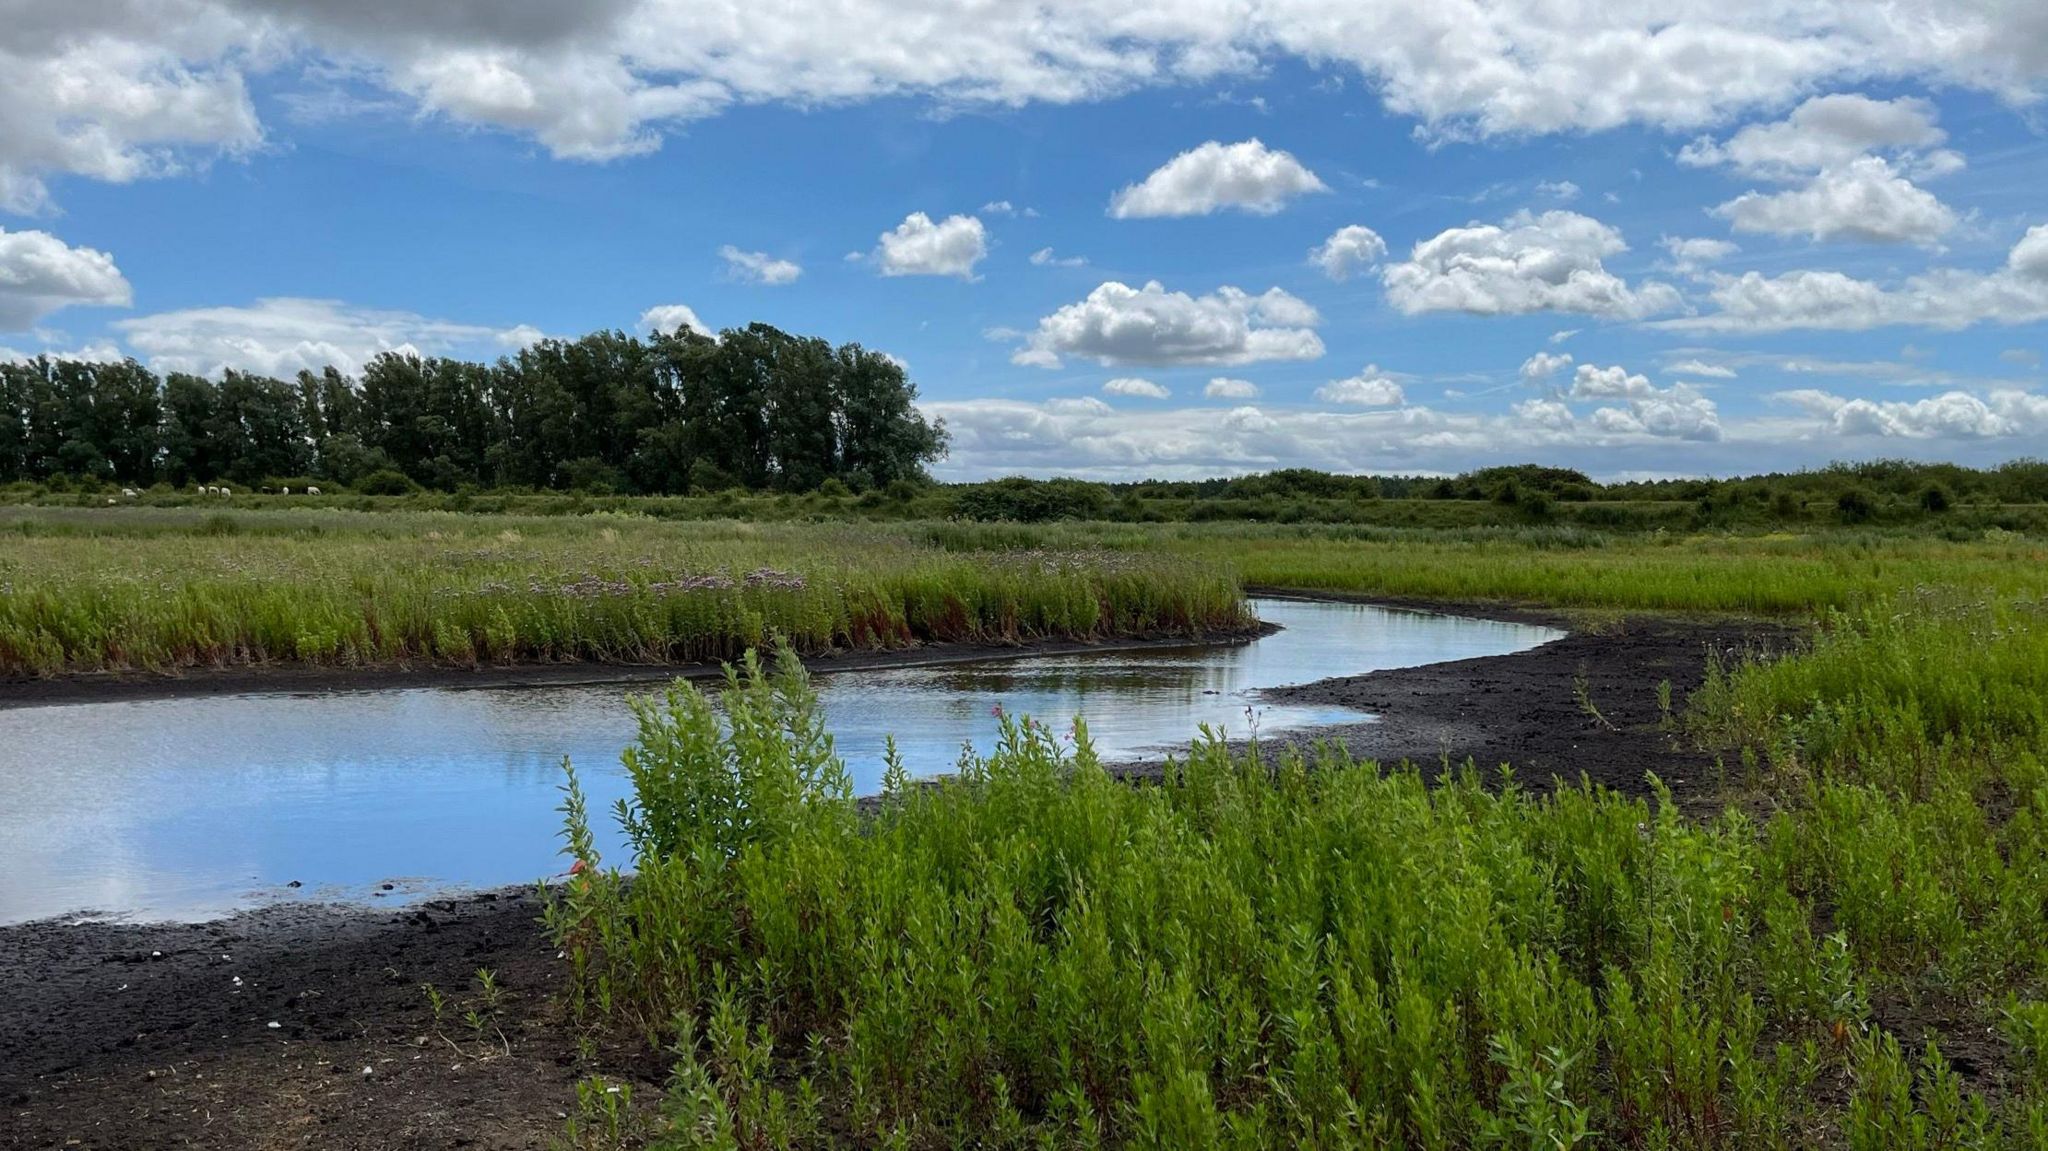 A landscape of scrubby plants on either side of a meandering waterway with a row of trees behind and cloud-studded blue sky above